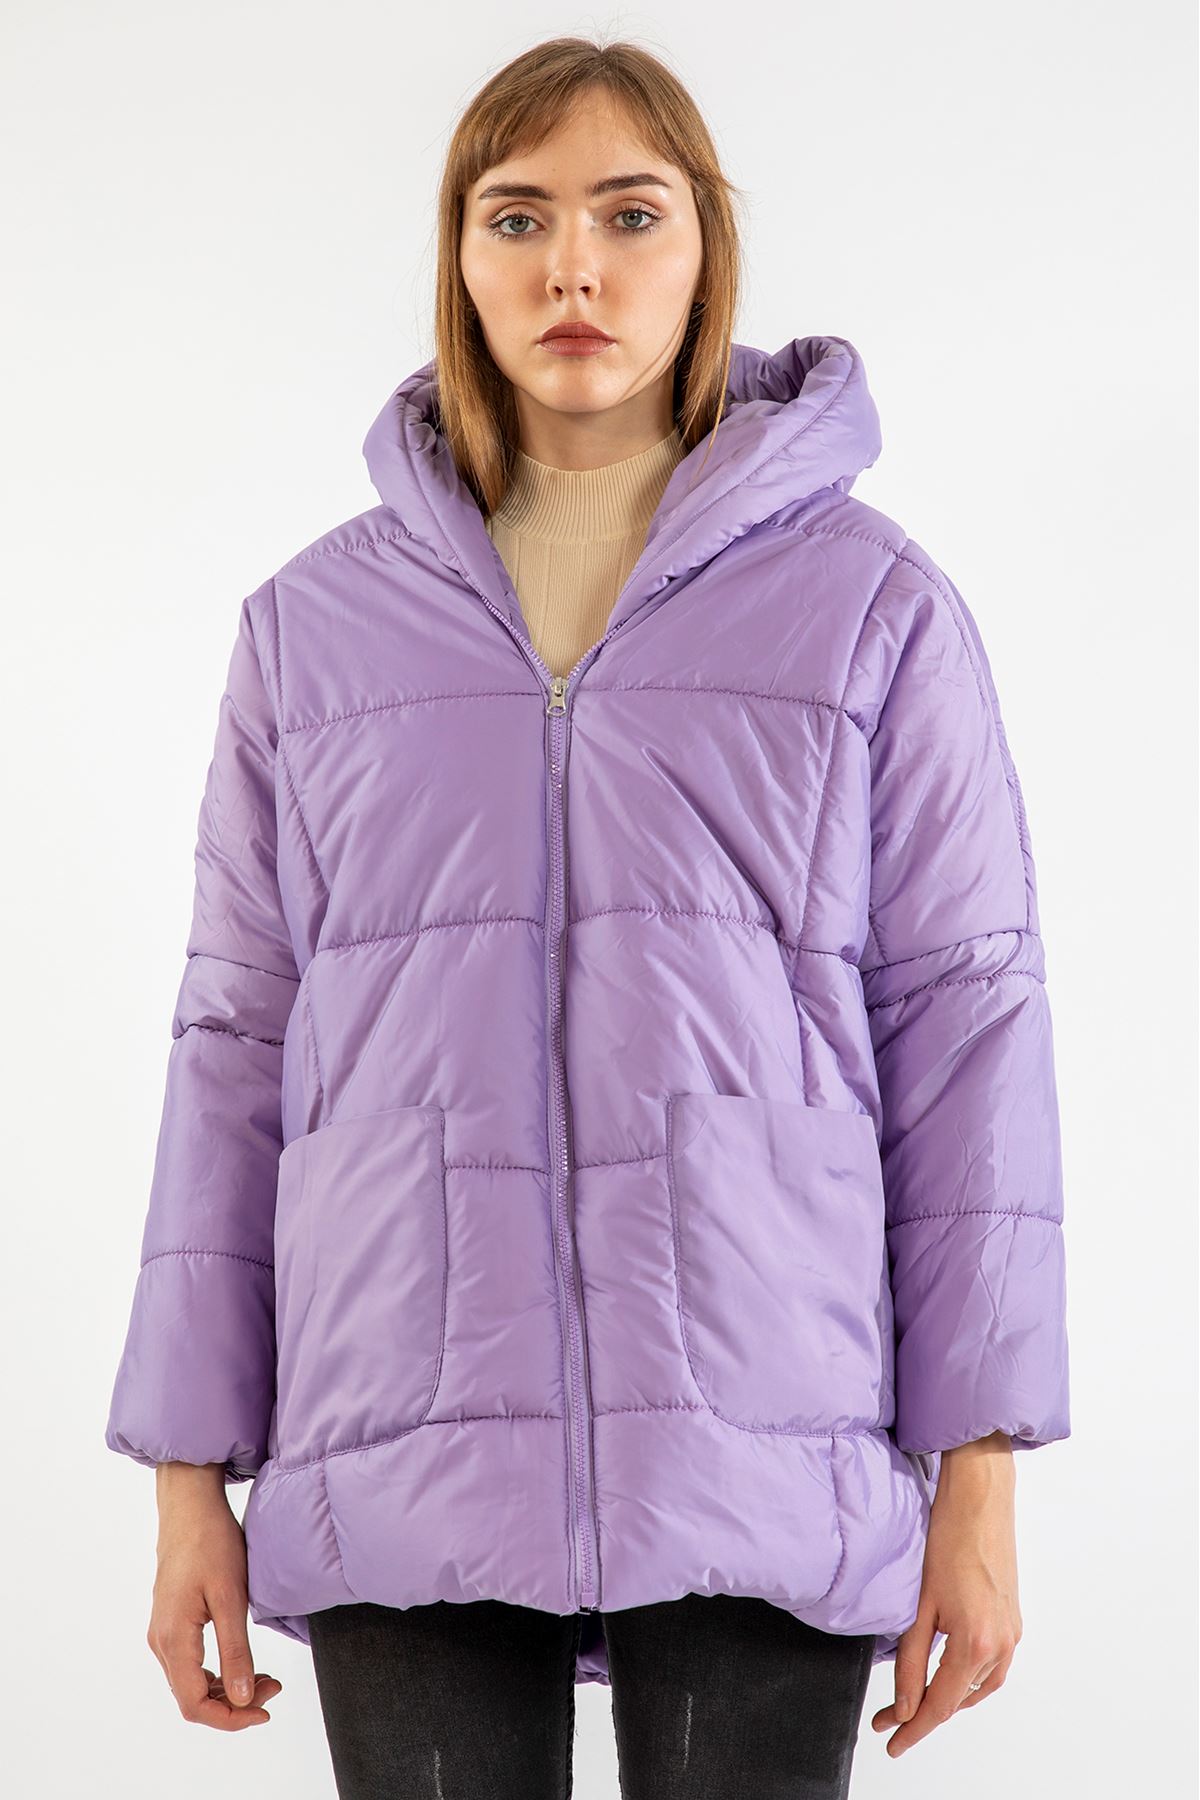 Quilted Fabric Long Sleeve Hooded Short Oversize Women Coat - Lilac